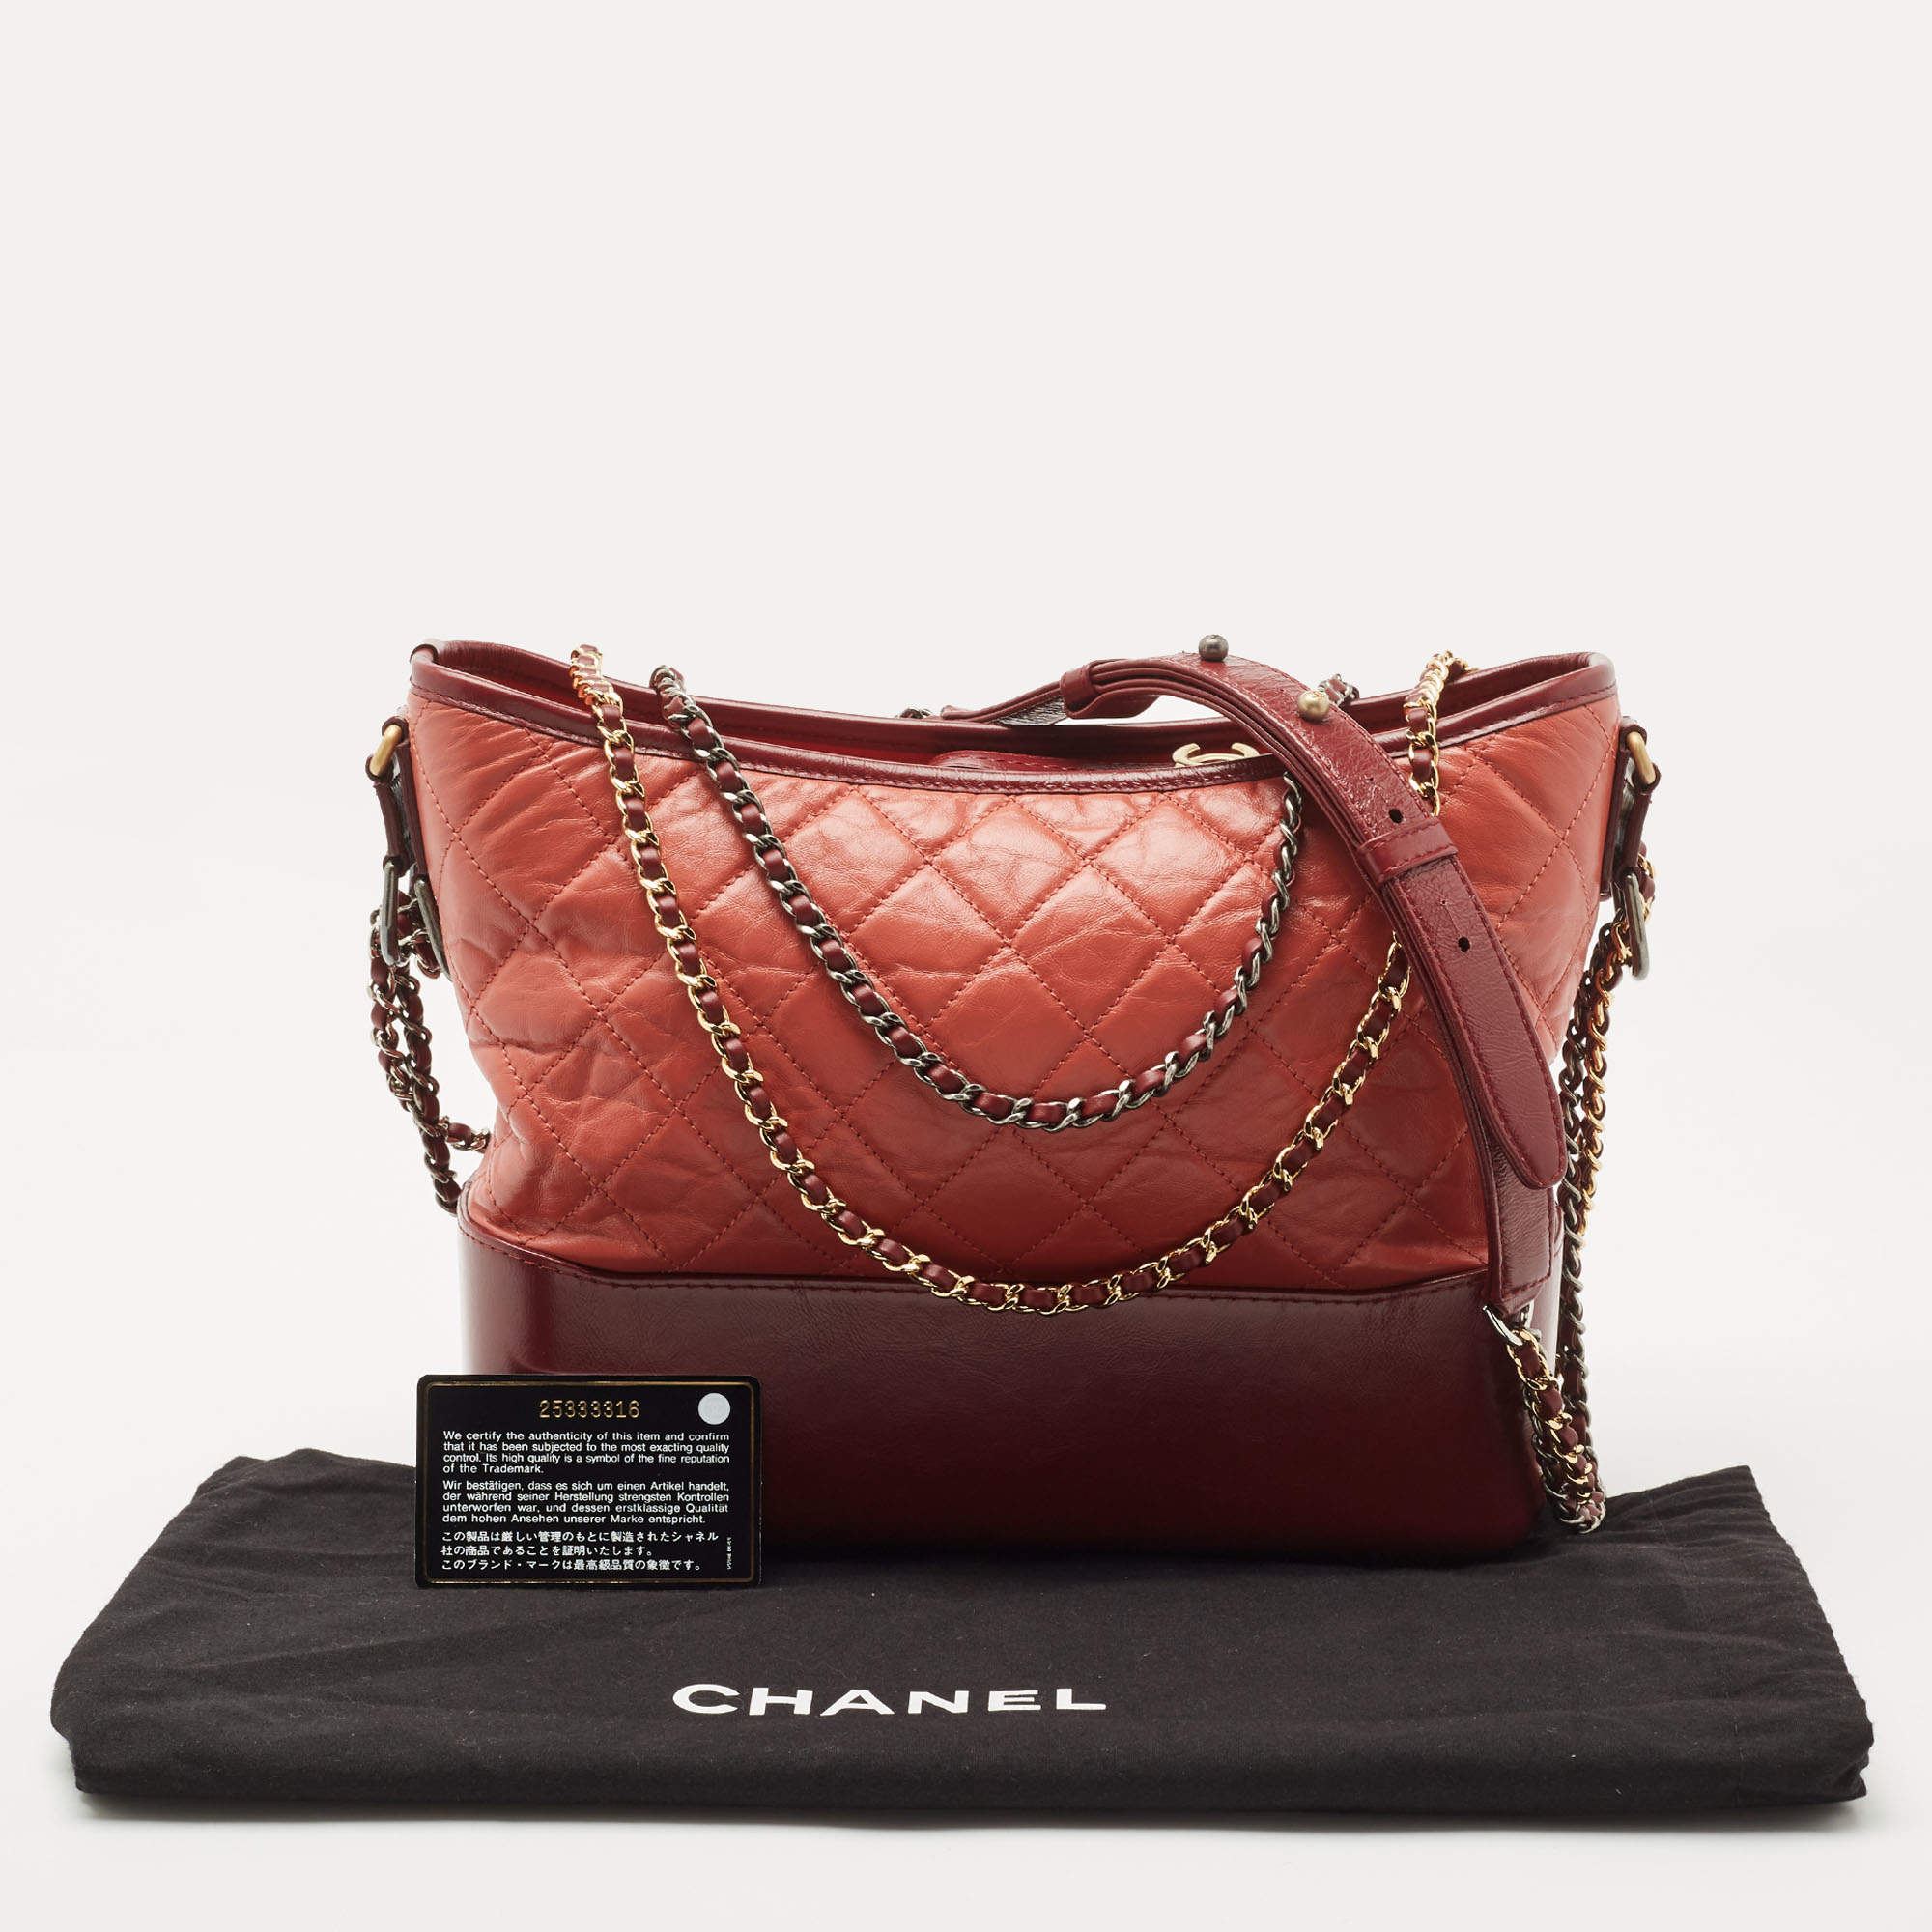 Chanel Burgundy/Orange Quilted Aged Leather Medium Gabrielle Hobo